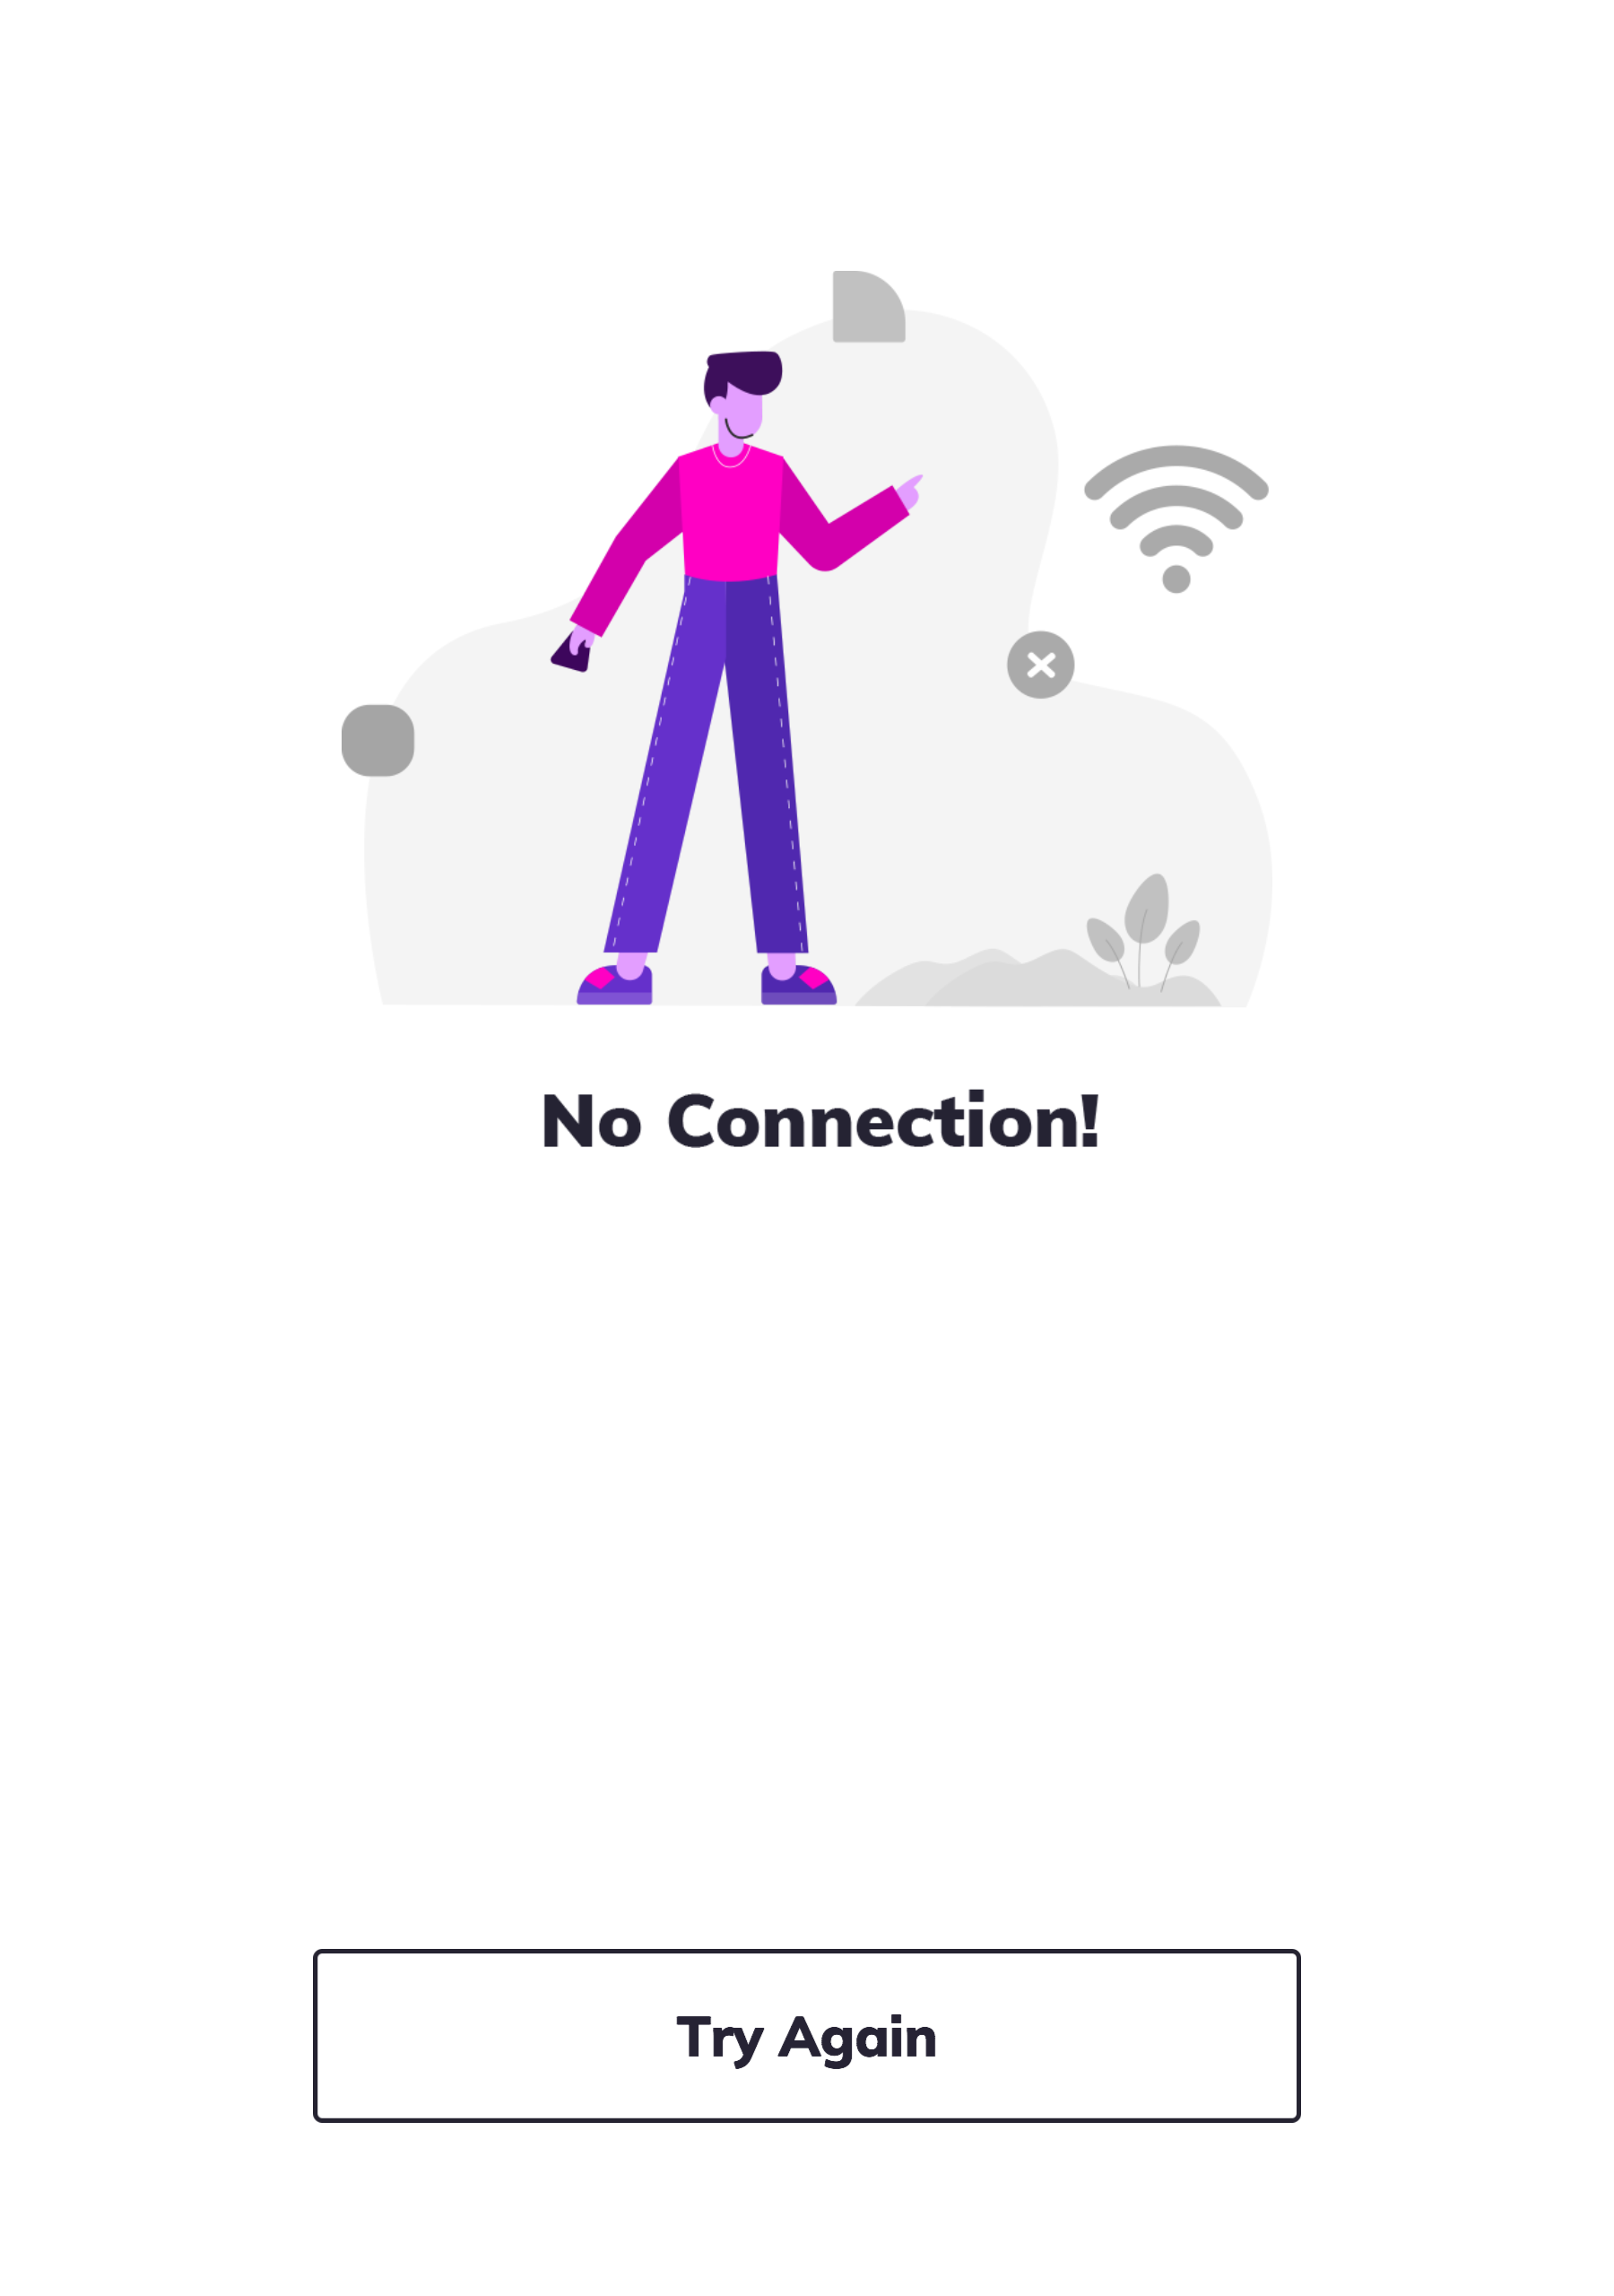 Startup screen of ARize app after disabling internet connection.